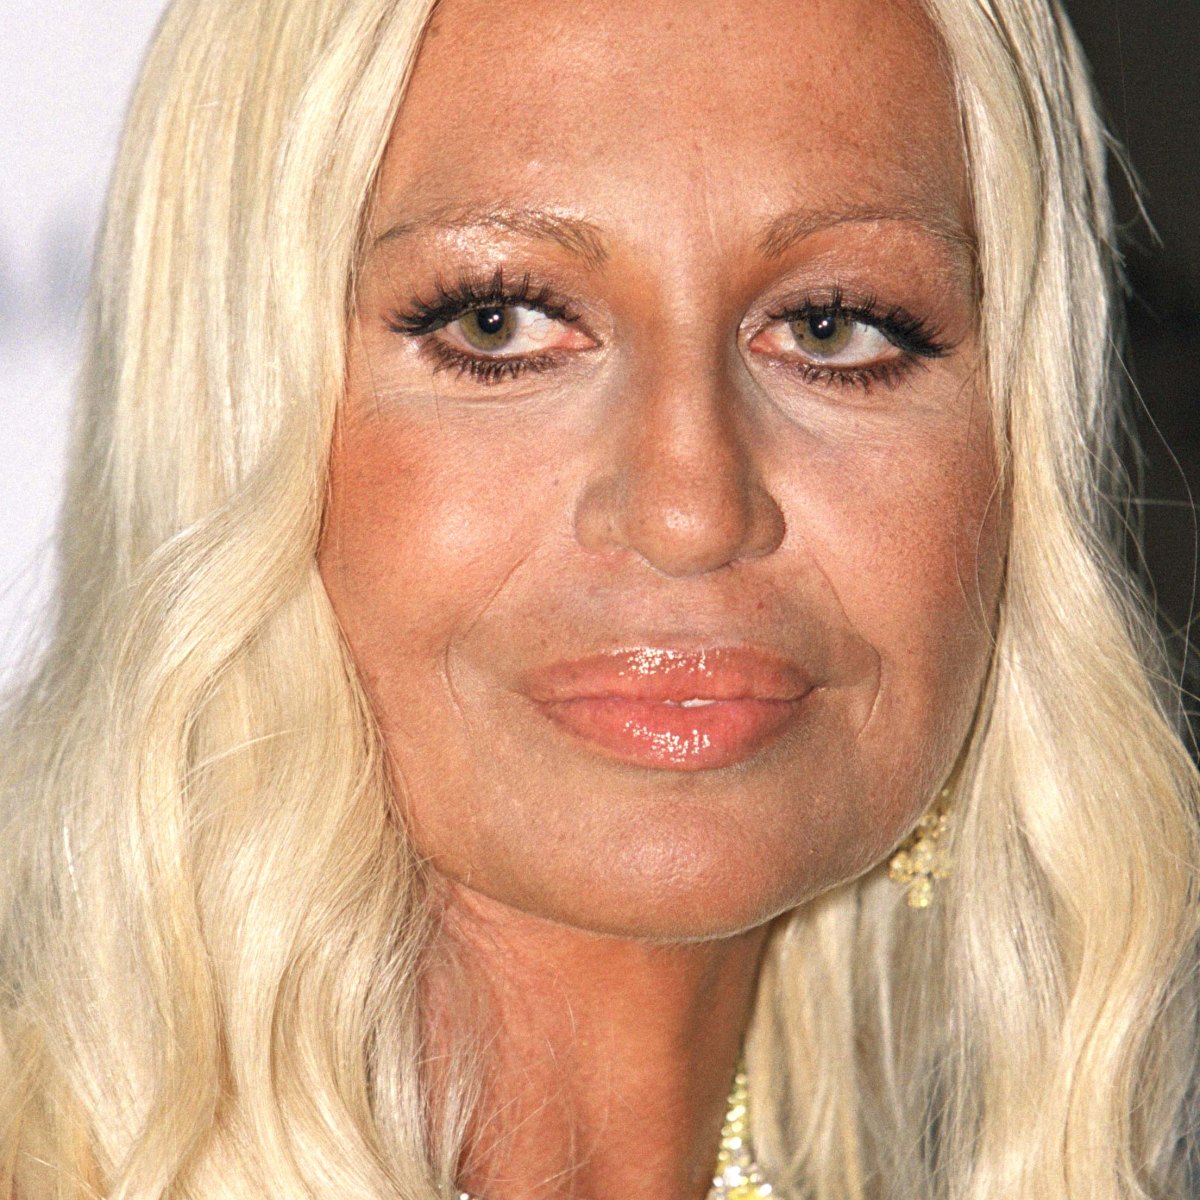 A young Donatella Versace looks an awful lot like a man I once